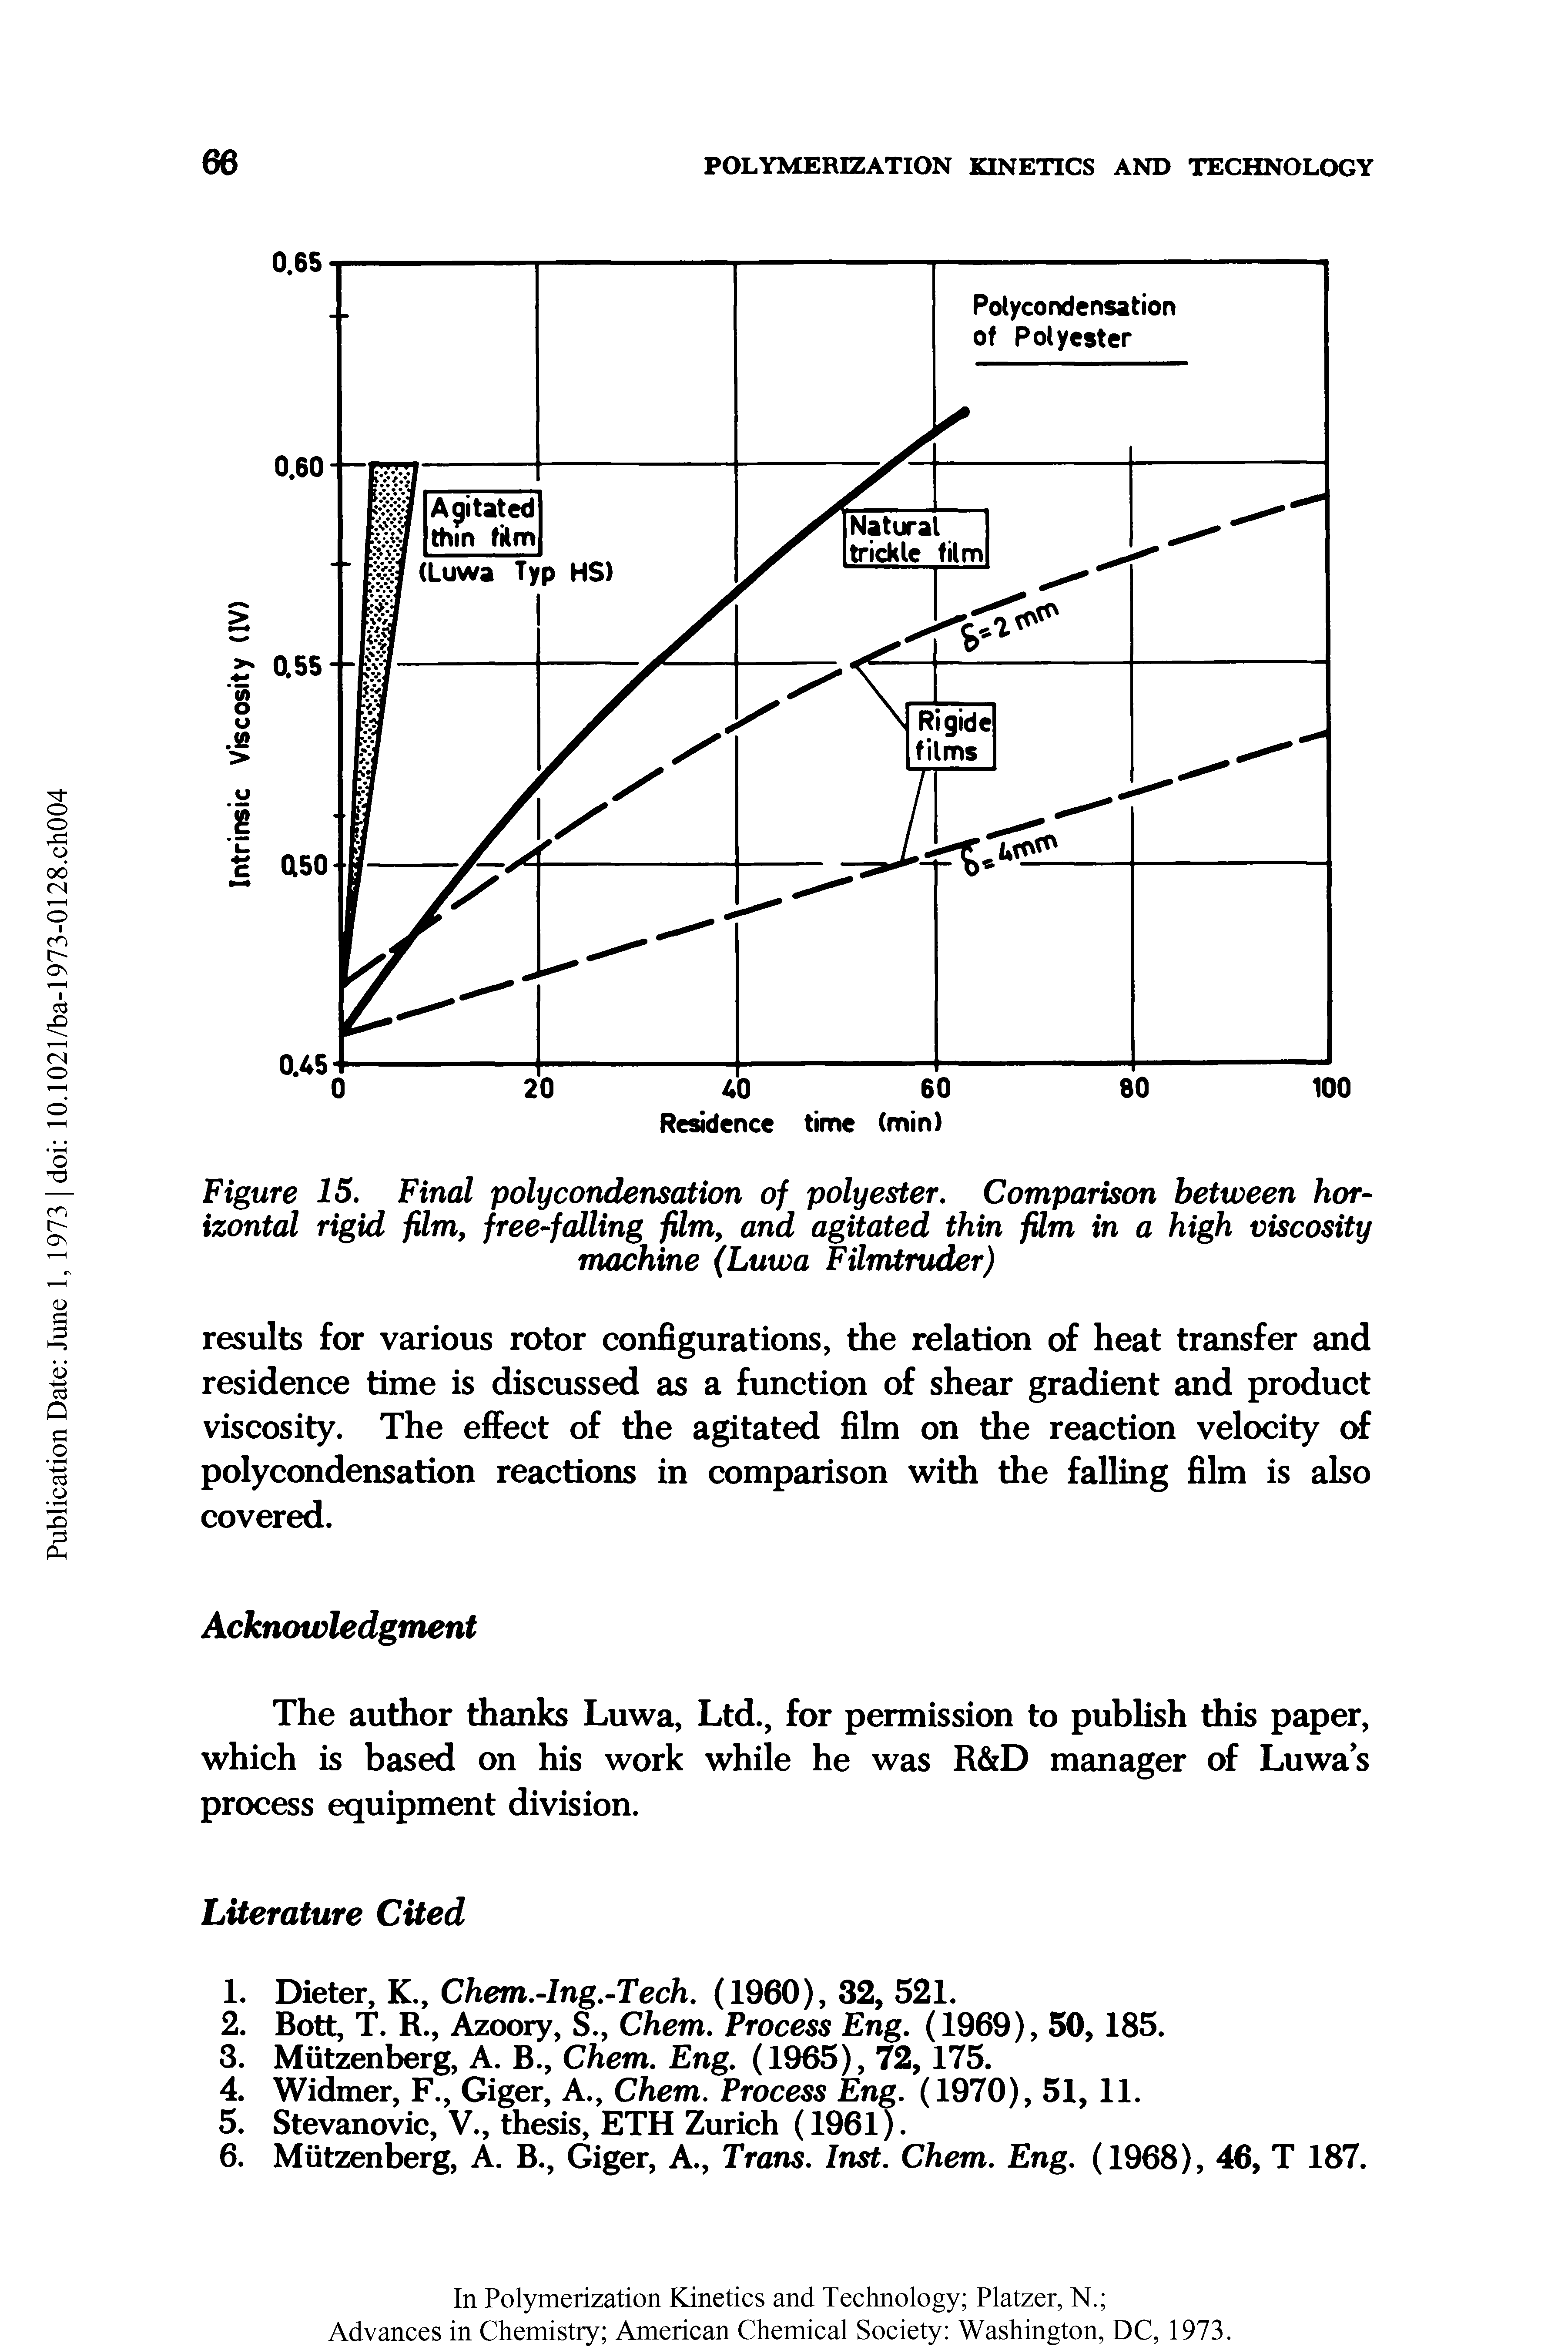 Figure 15. Final polycondensation of polyester. Comparison between horizontal rigid film, free-falling film, and agitated thin film in a high viscosity machine (Luwa Filmtruder)...